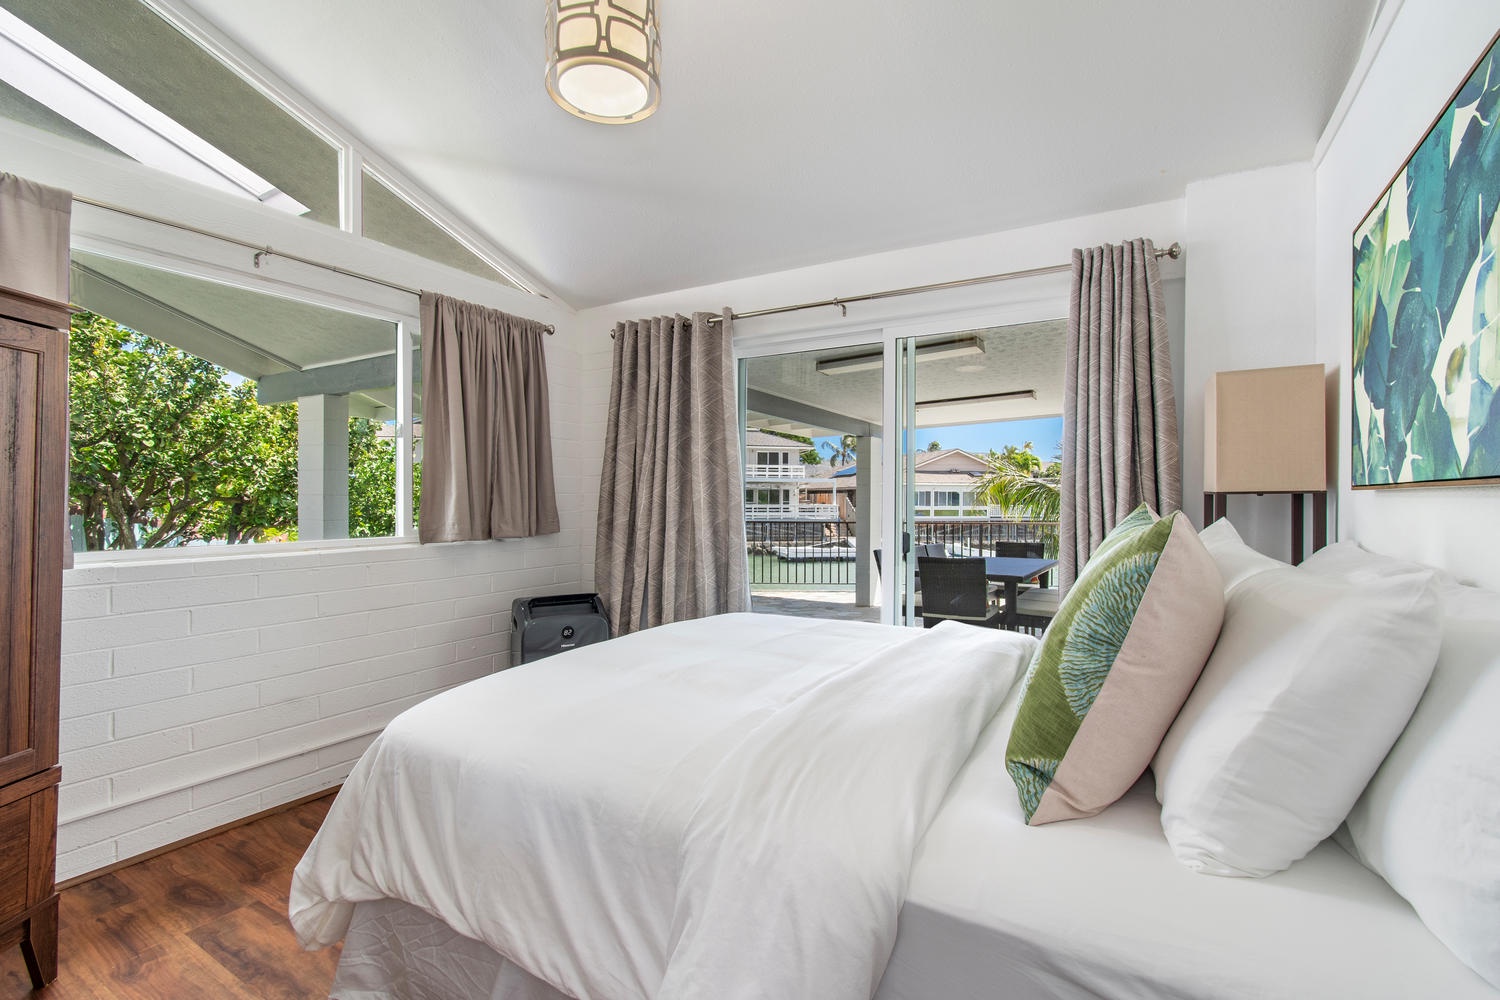 Honolulu Vacation Rentals, Holoholo Hale - Bedroom 4 - Queen bed, standing ac with marina views.